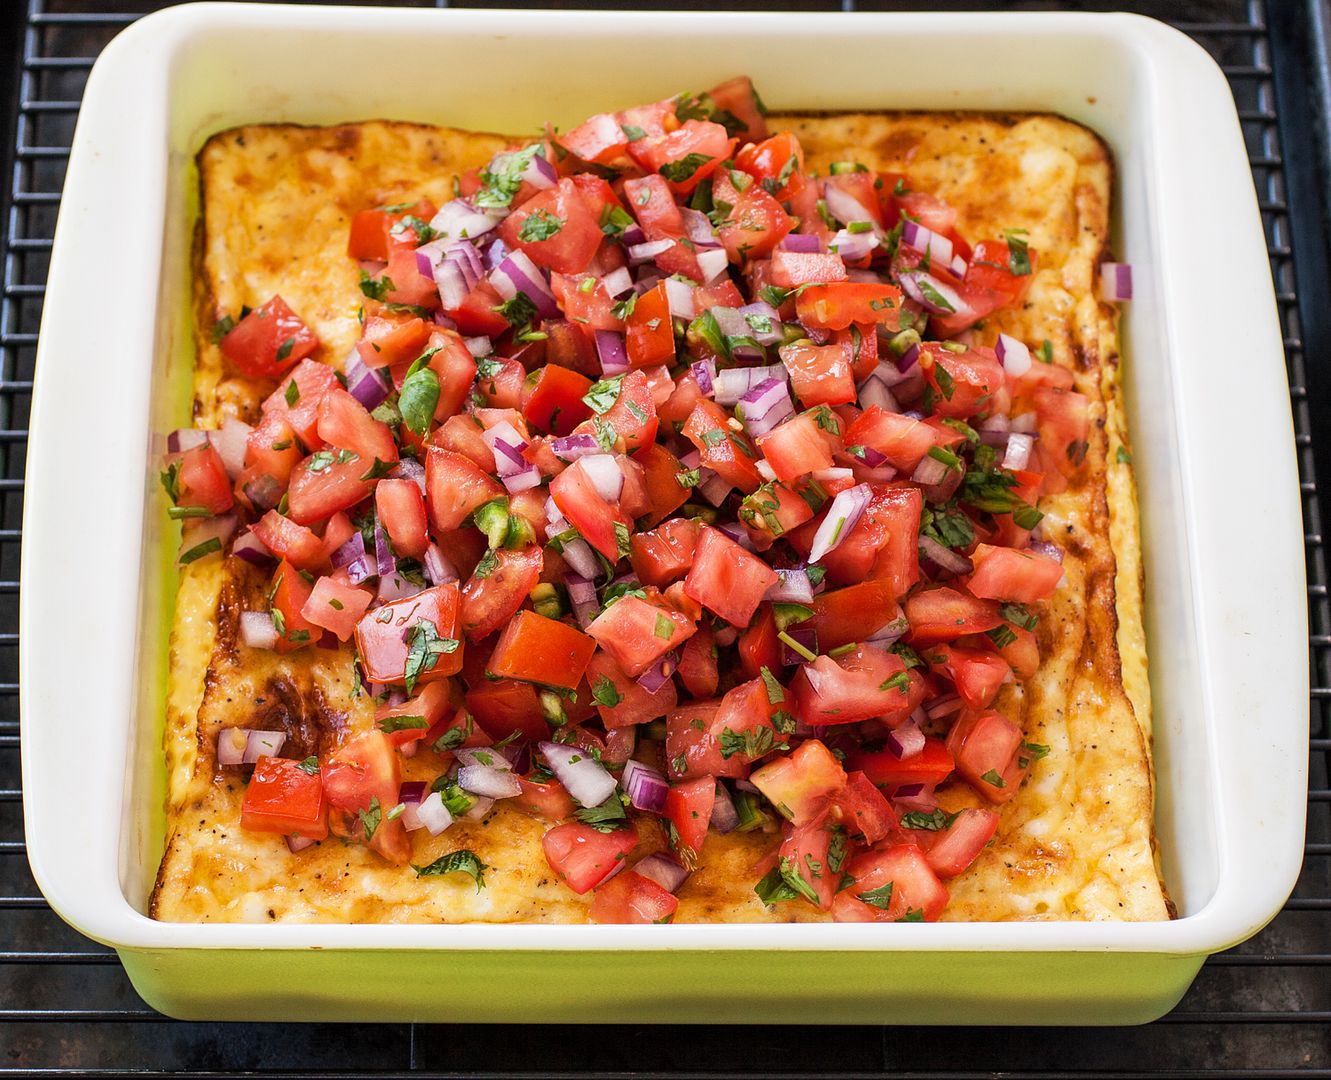 Brunch doesn't get any easier than this delicious Fluffy Baked Omelet with Pico de Gallo from the 8x8 Cookbook by Kathy Strahs